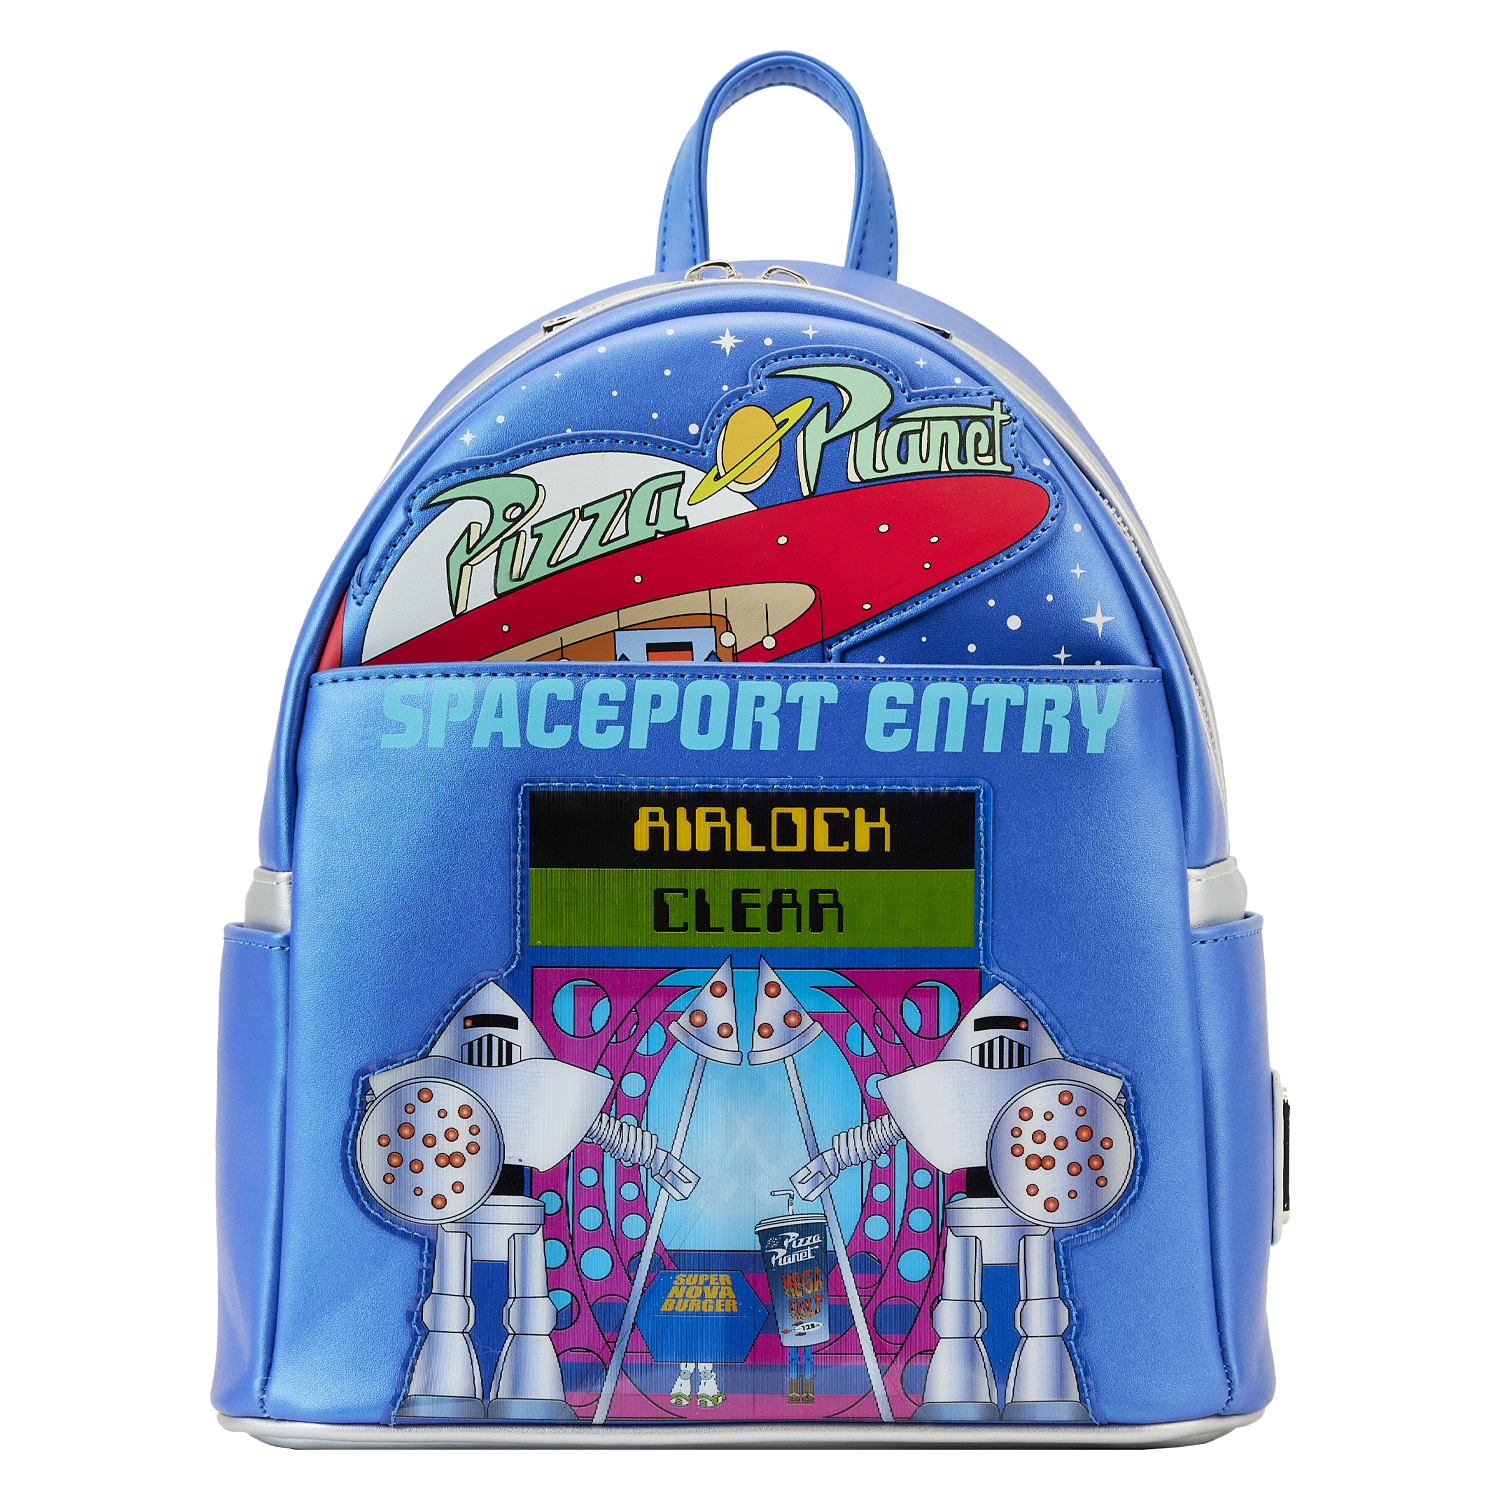 Monsters University Scare Games Mini Backpack – Stage Nine Entertainment  Store